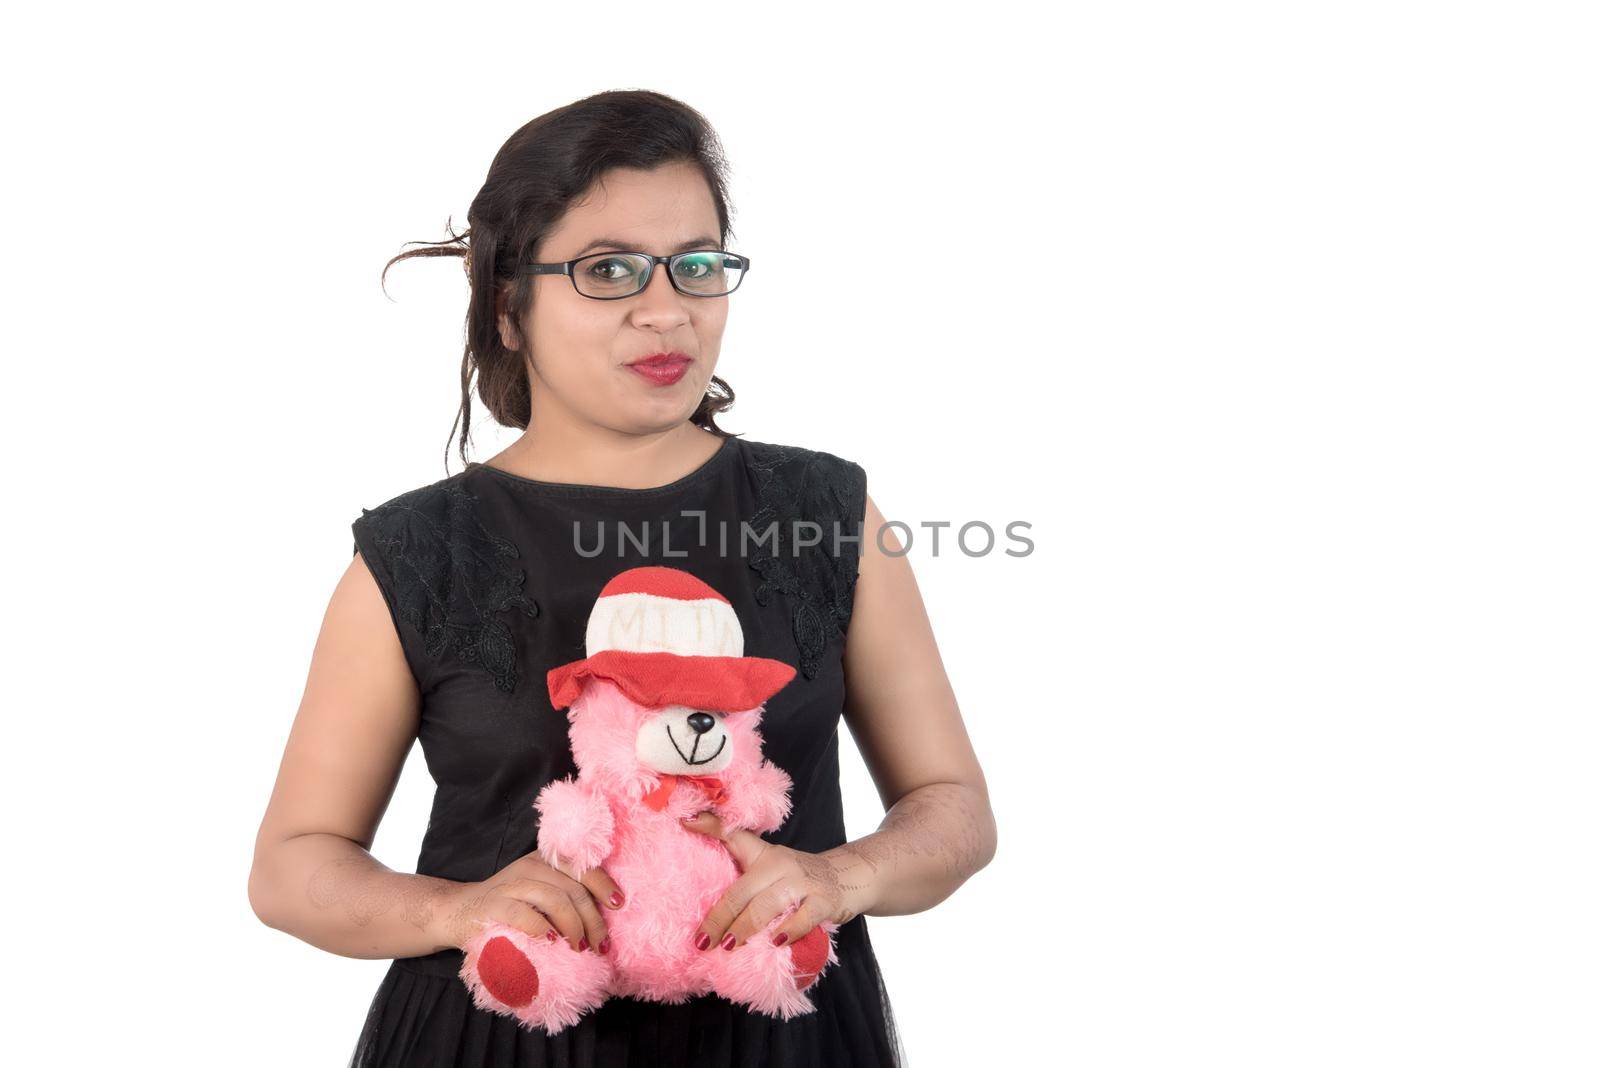 Beautiful young girl holding and playing with a teddy bear toy on a white background.